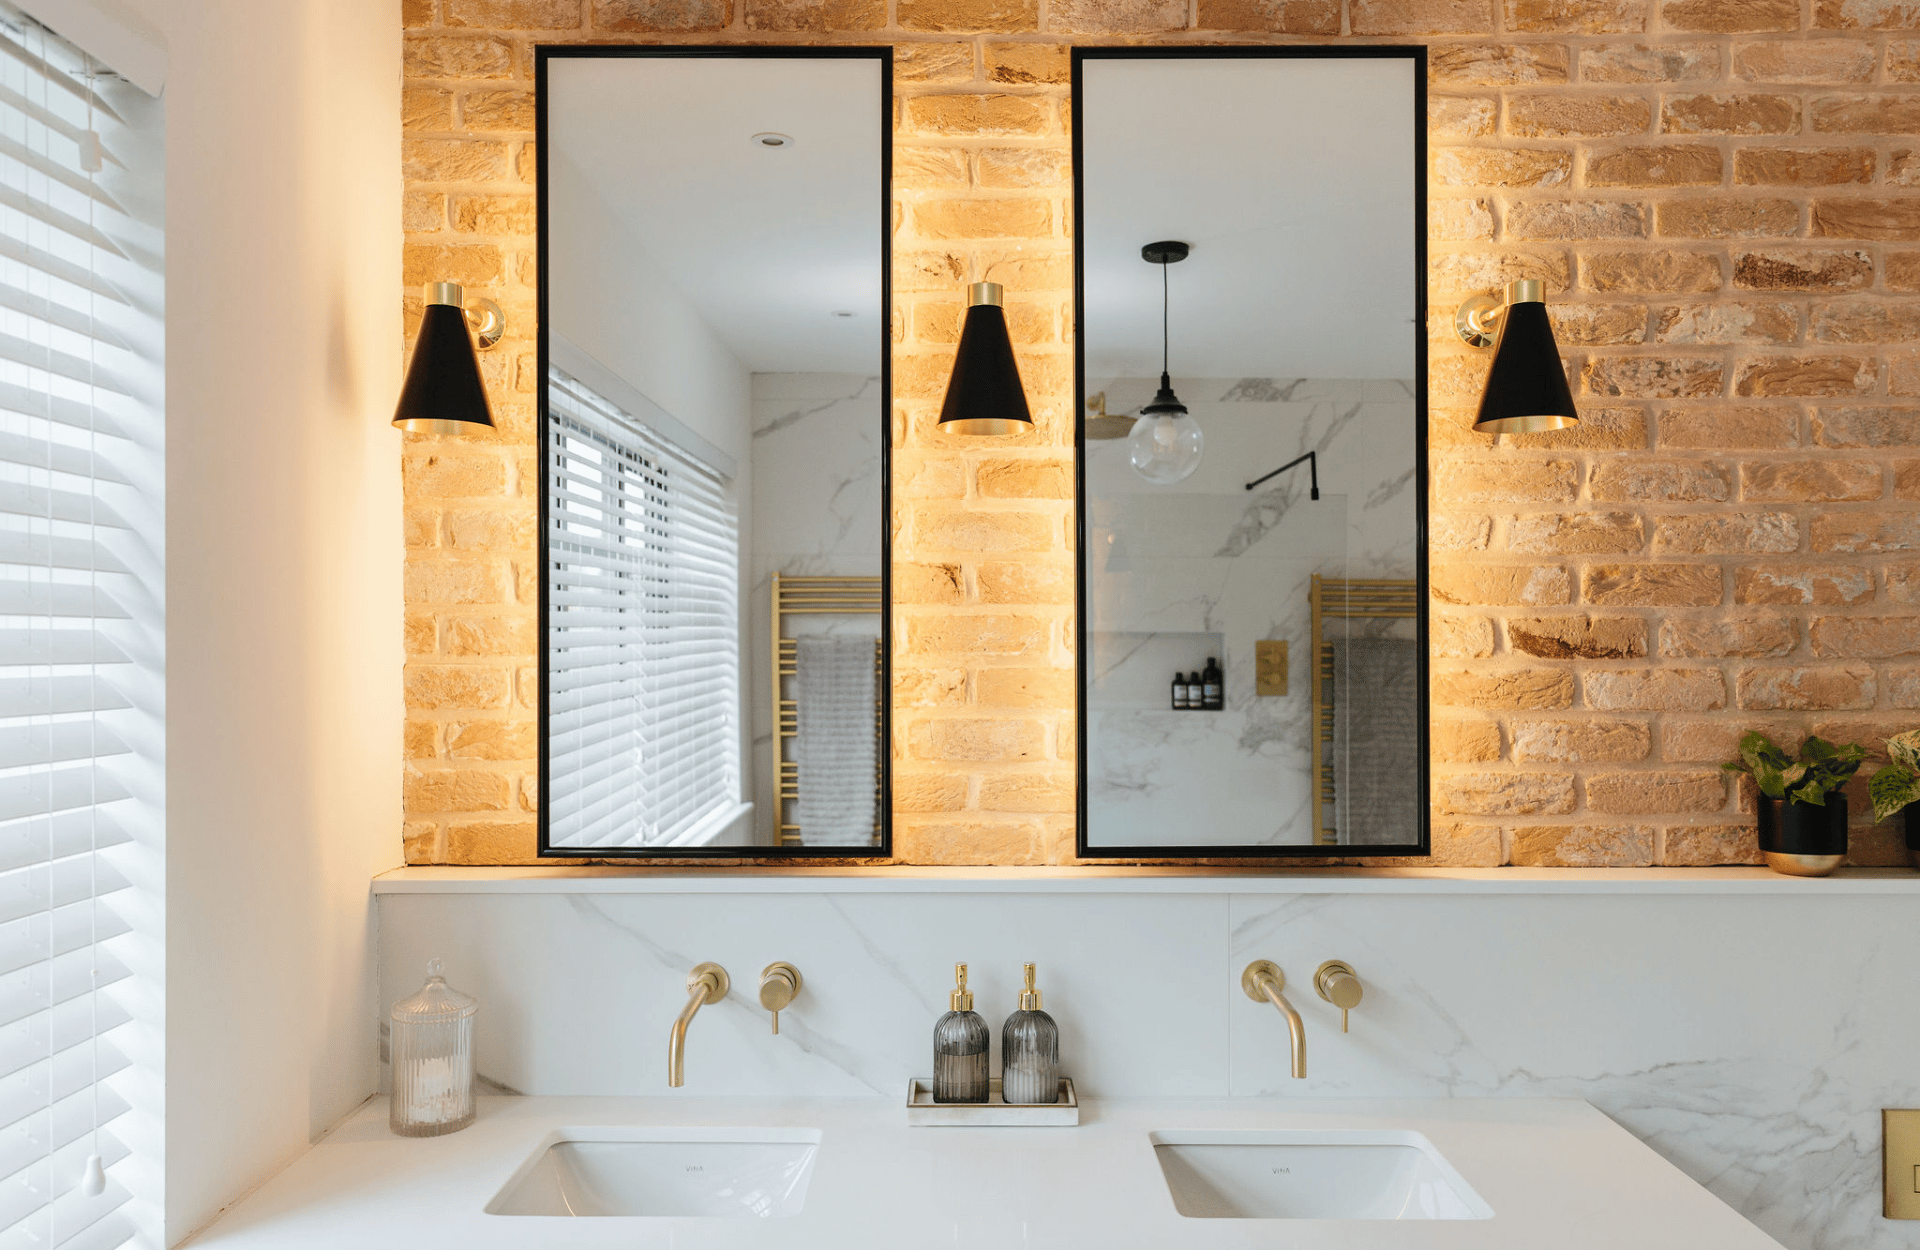 Bathroom with exposed brick wall